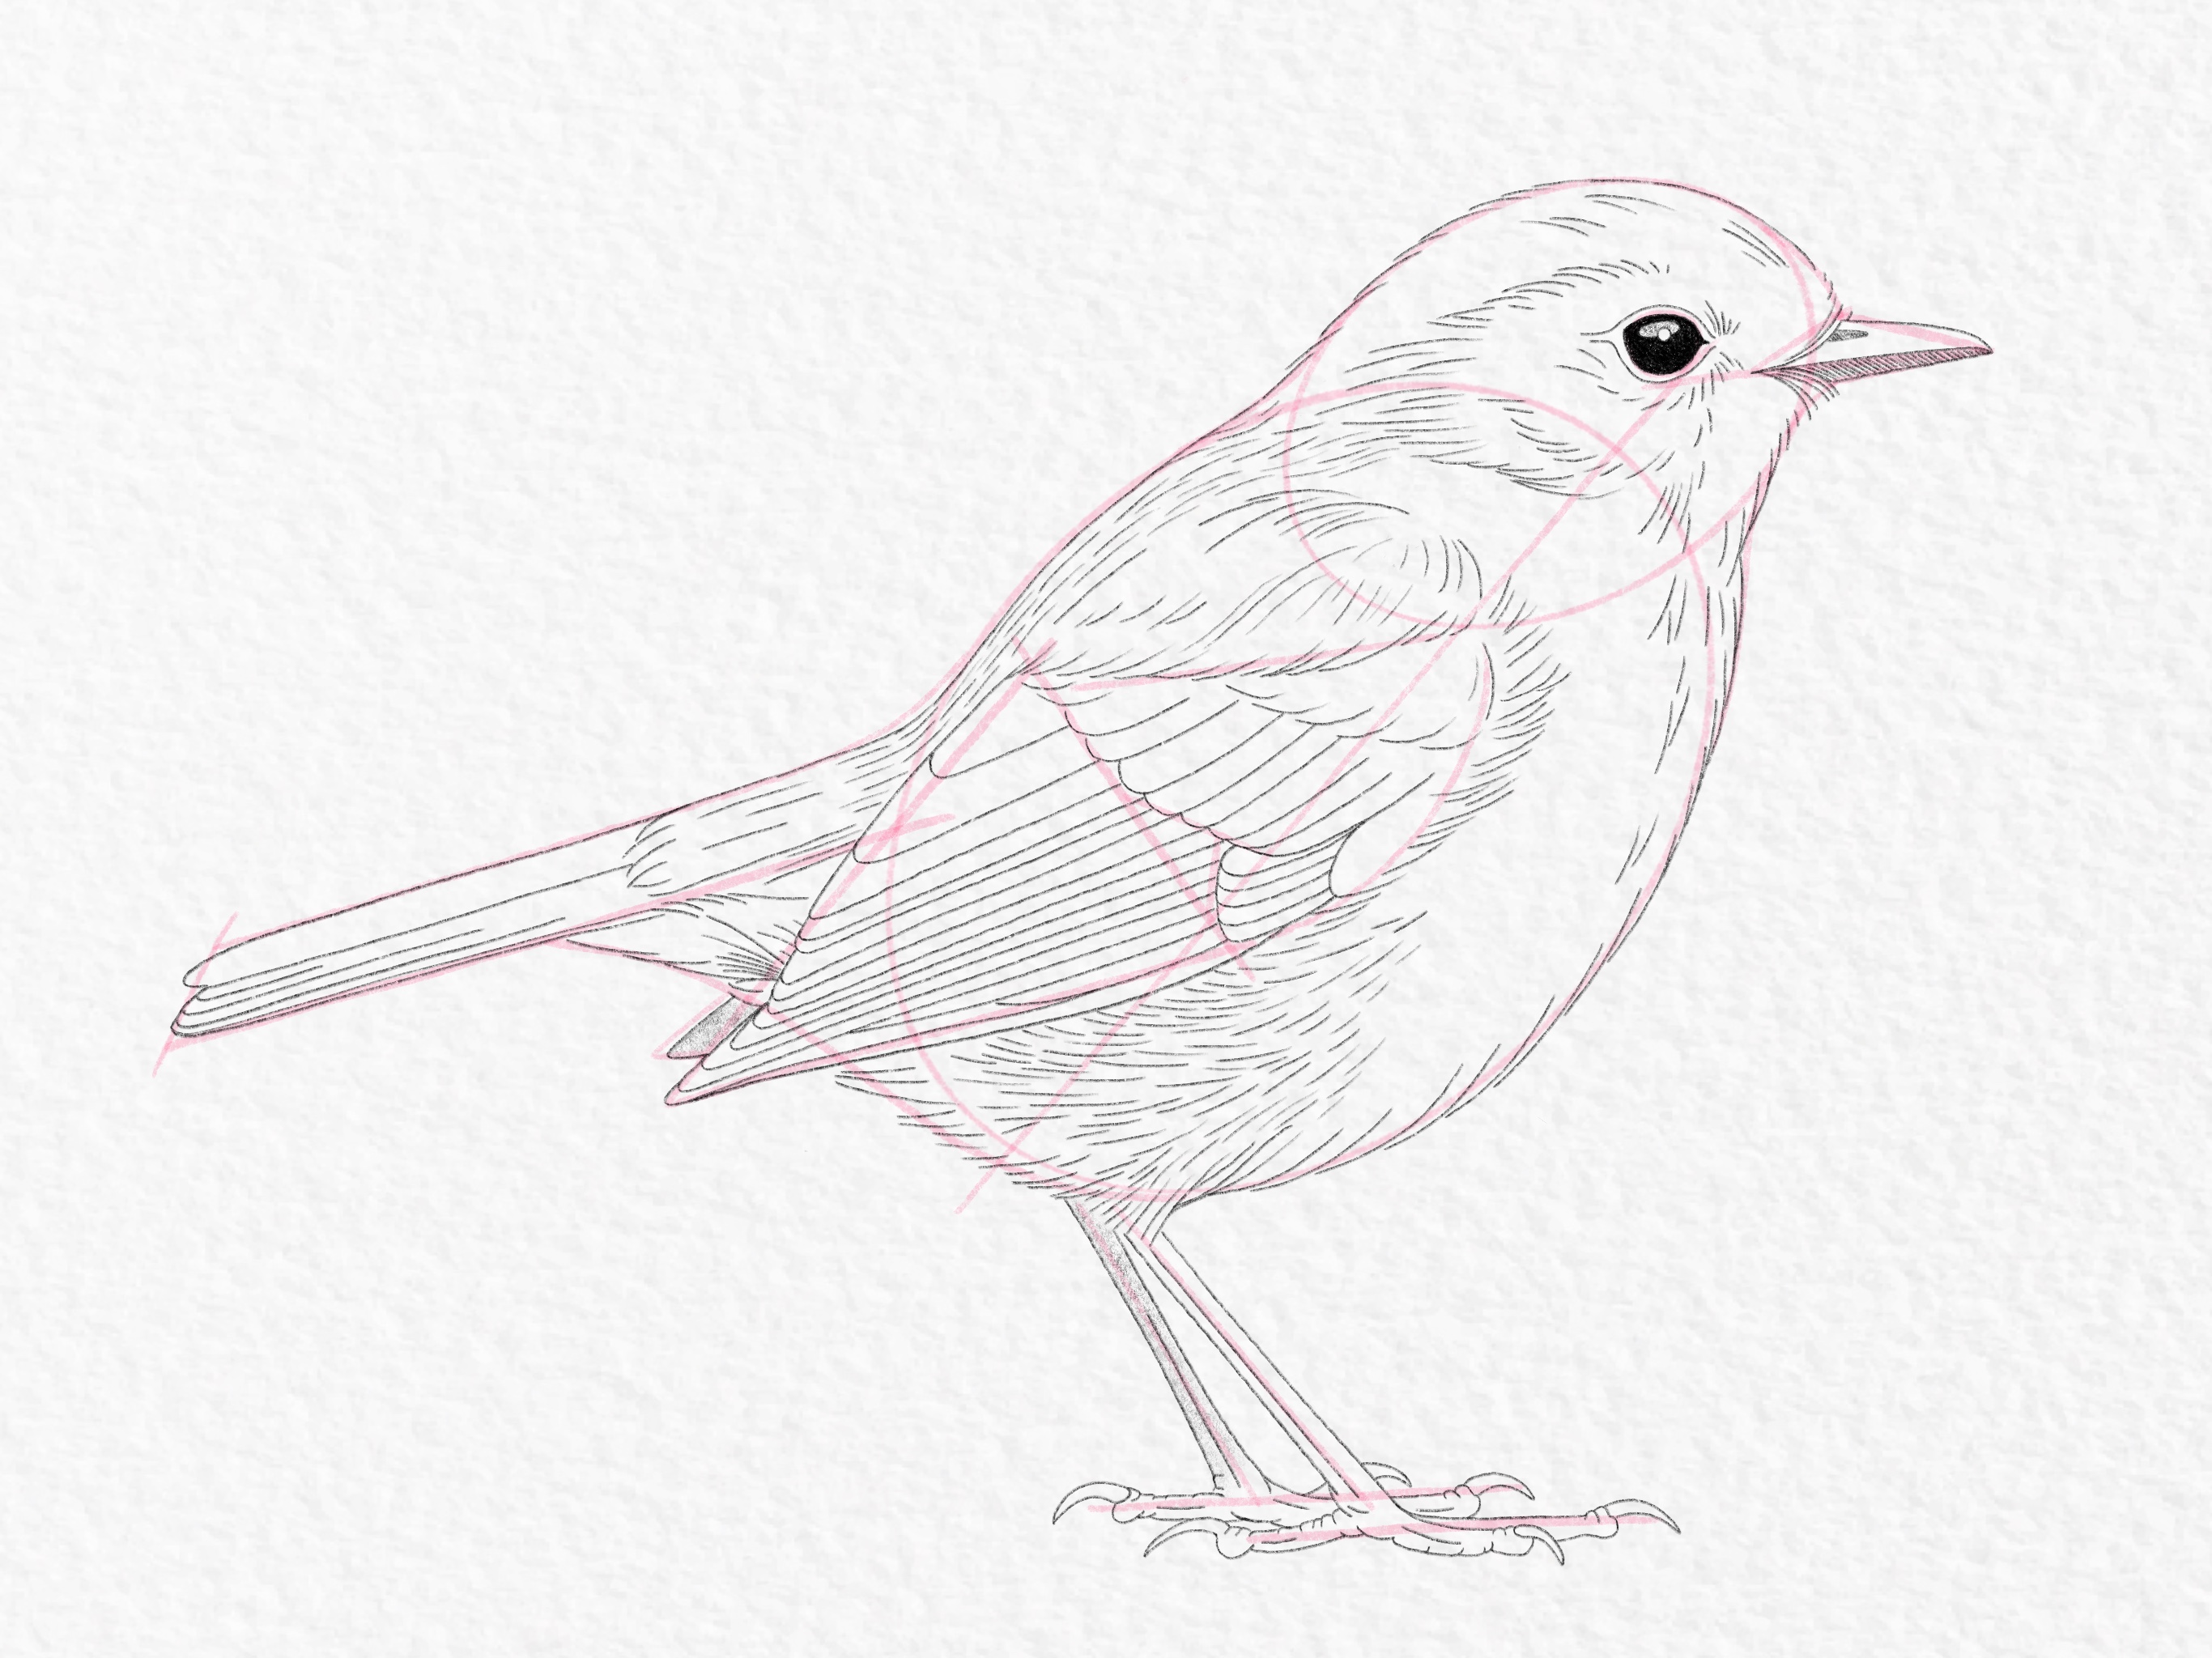 How To Draw A Bird - A Step By Step Guide With Pictures